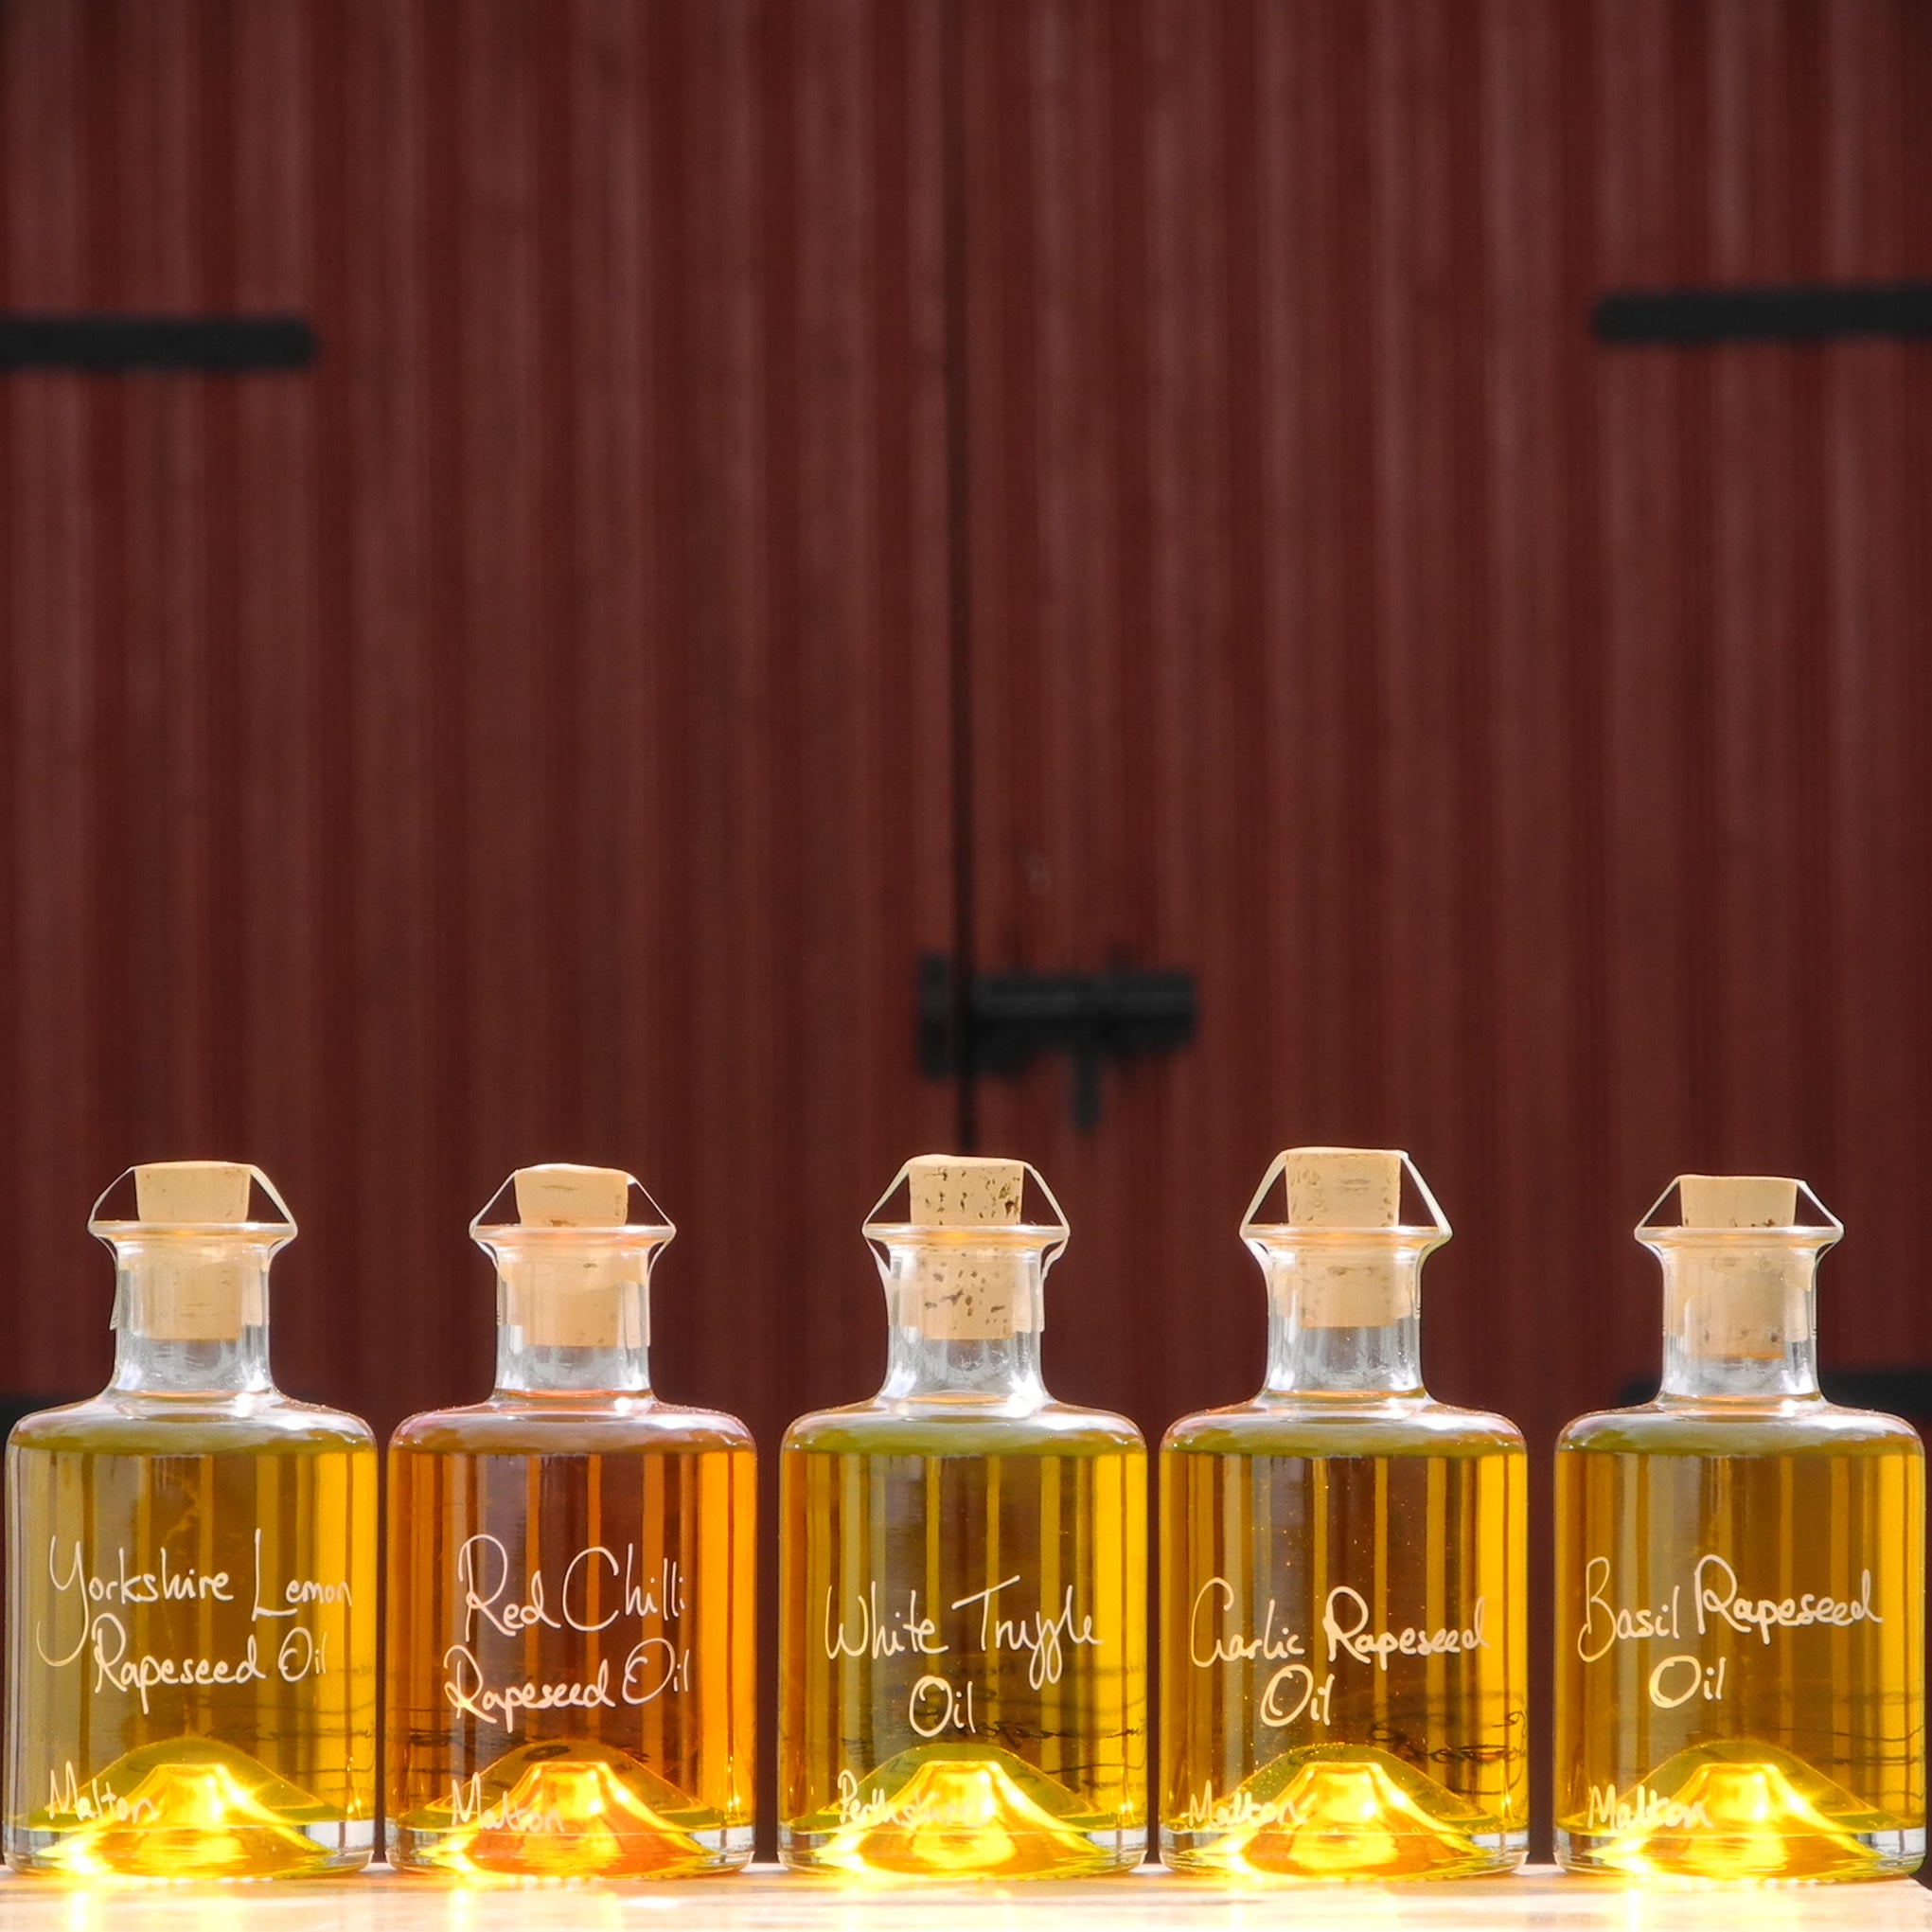 The Connoisseurs Infused Oil Collection with White Truffle Oil, Lemon Rapeseed Oil, Red Chilli Rapeseed Oil, Garlic Rapeseed Oil and Basil Rapeseed Oil in refillable 200ml bottles, this great fathers day gift is displayed in front of red barn doors. Personalised gift for cooks.